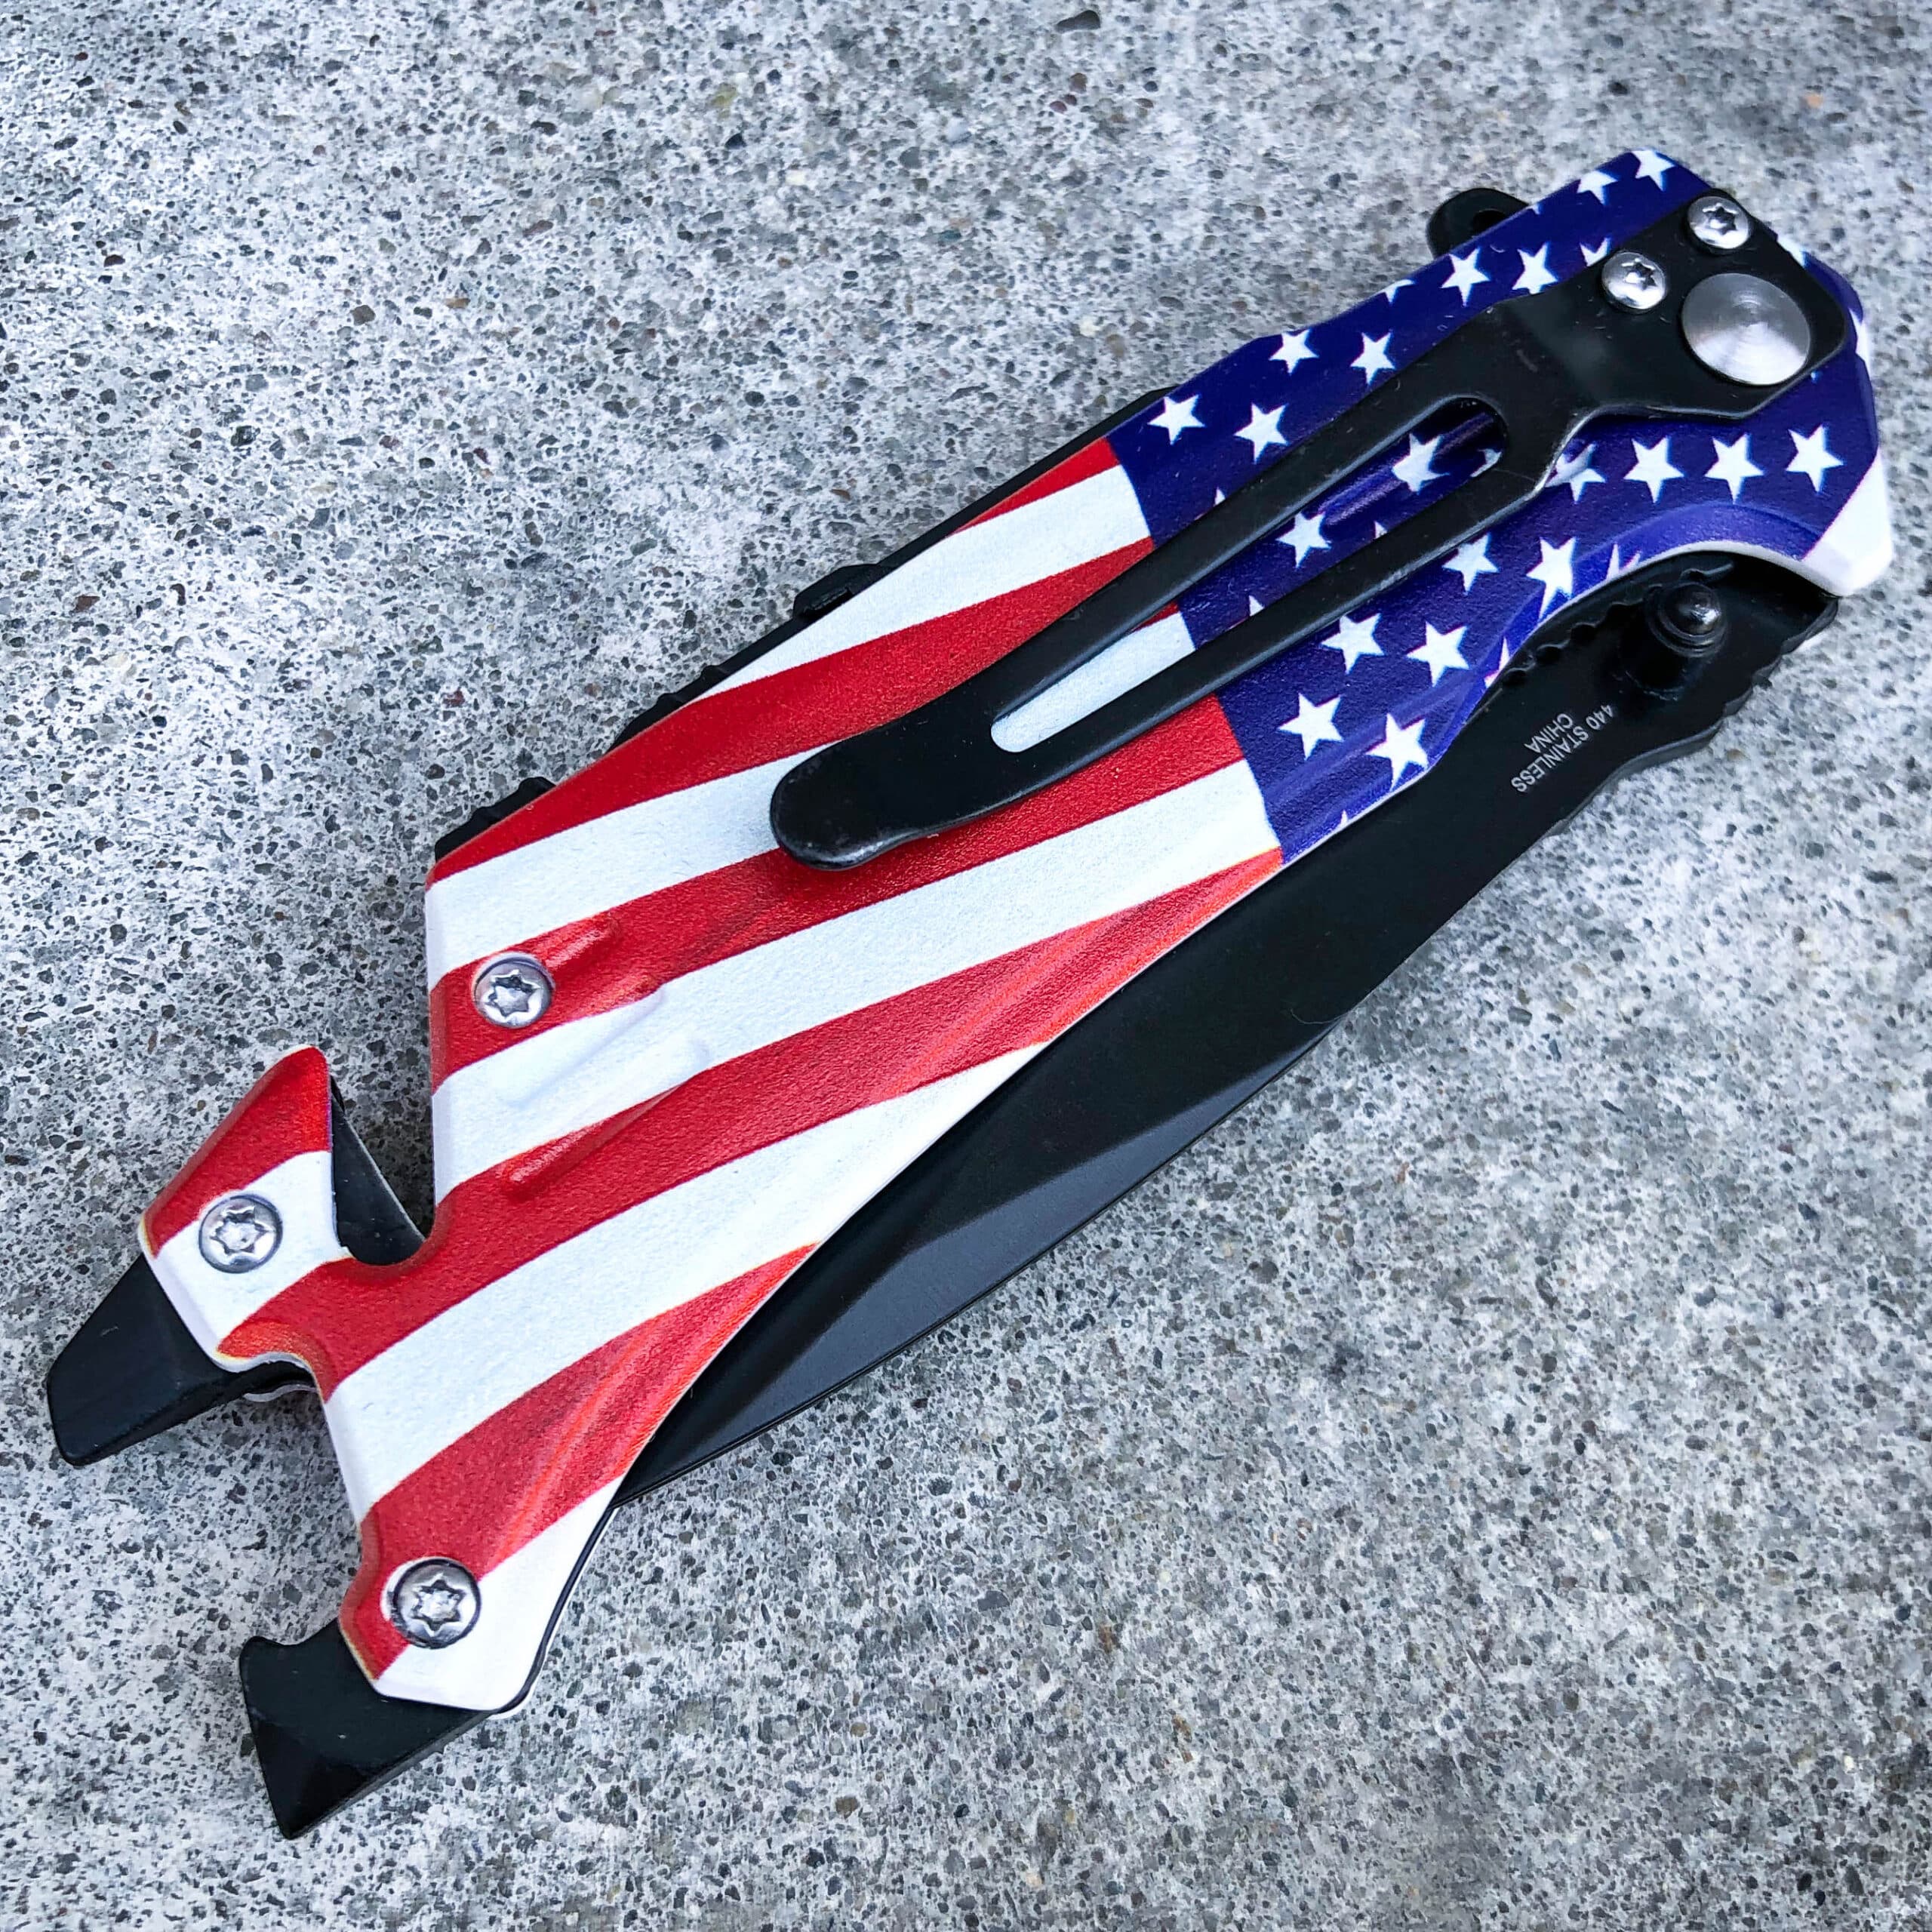 8" AMERICAN FLAG Knife USA Tactical Spring OPEN Assisted Folding Pocket Rescue Knife Multi Tool